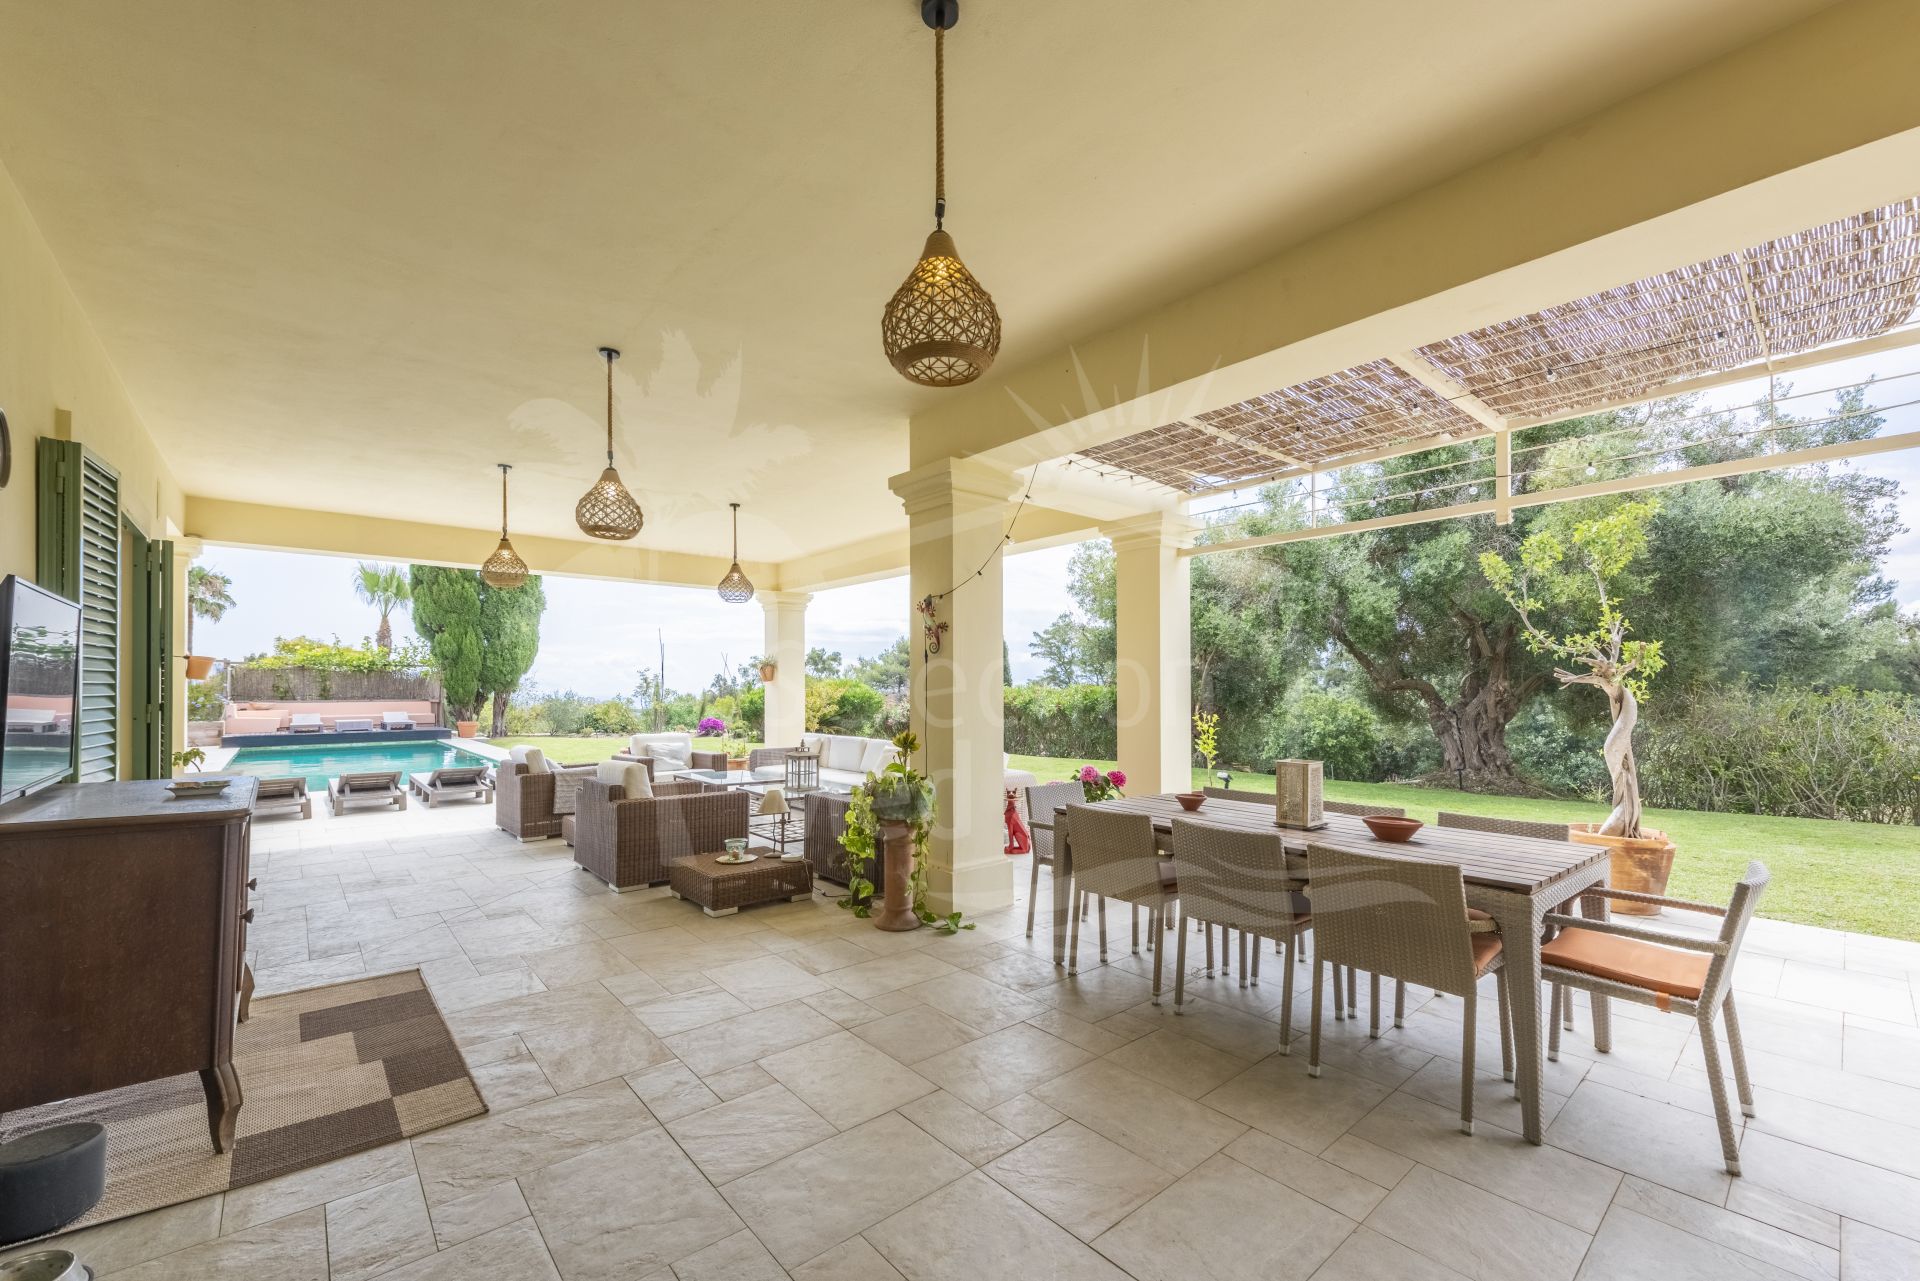 Stunning Family Villa in Sotogrande Alto, With Sea Views and Separate Guest Accommodation